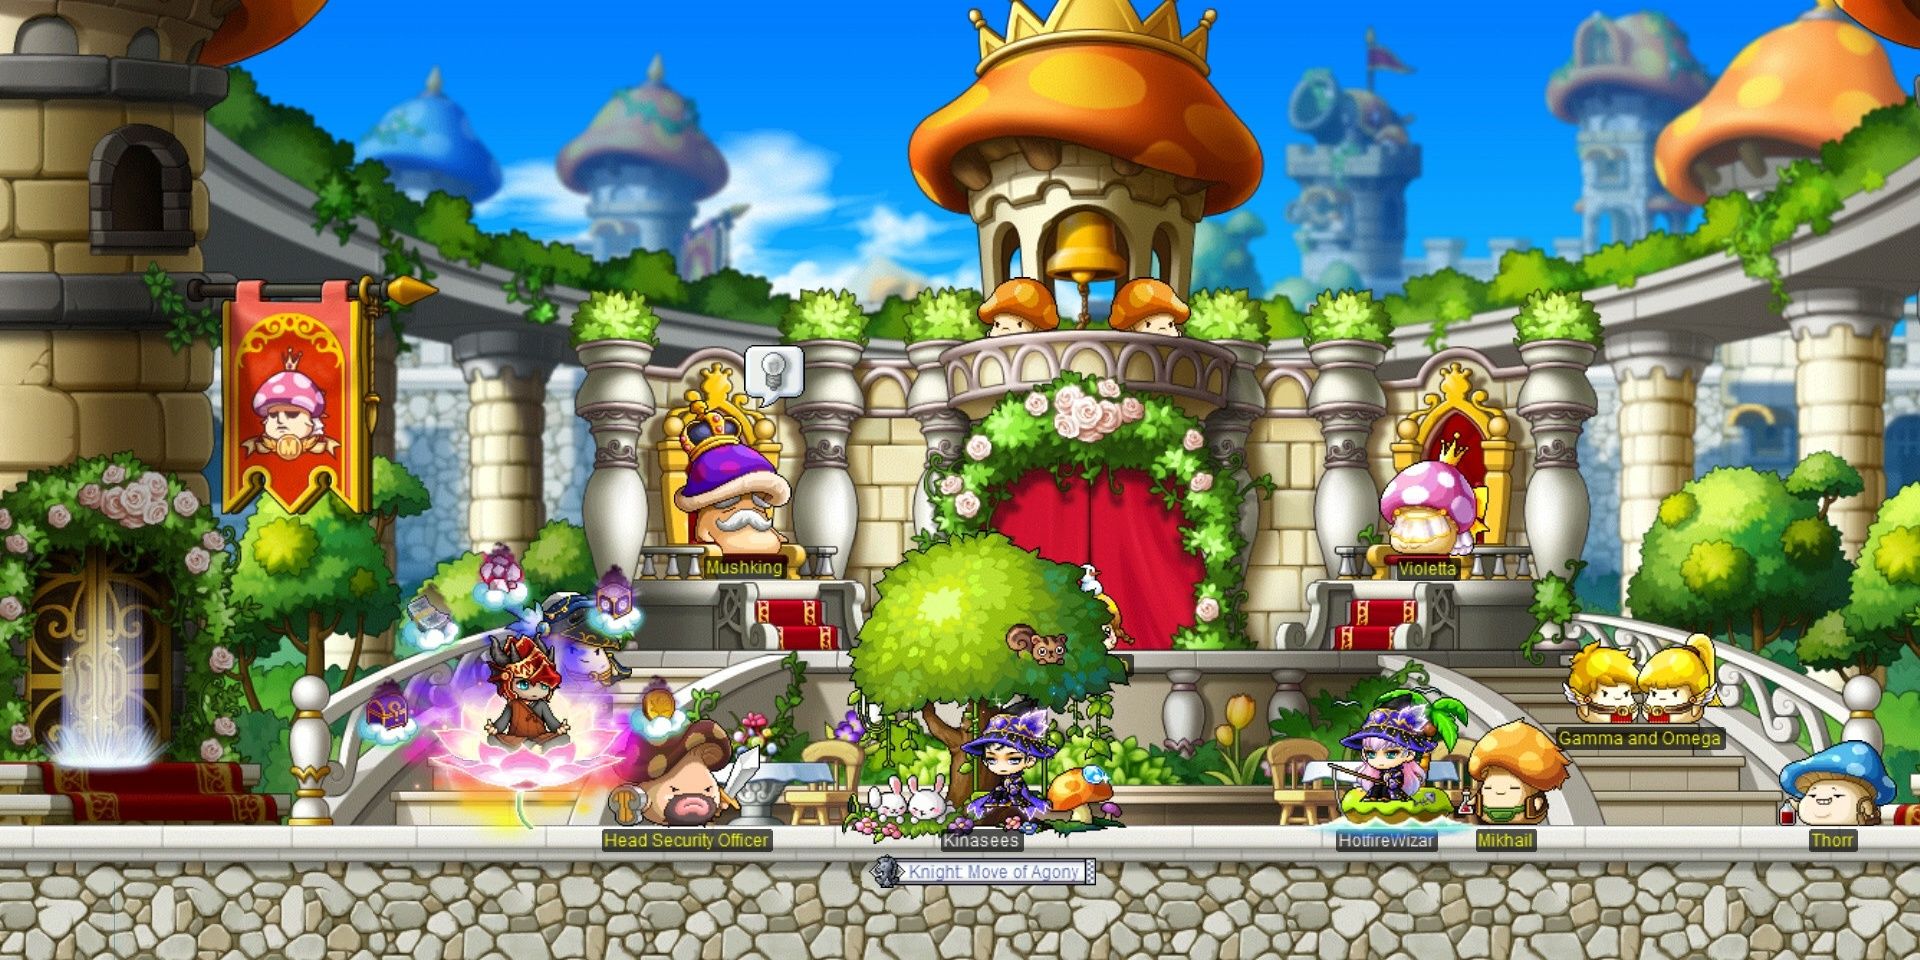 Image of some gameplay from the MMORPG game MapleStory.